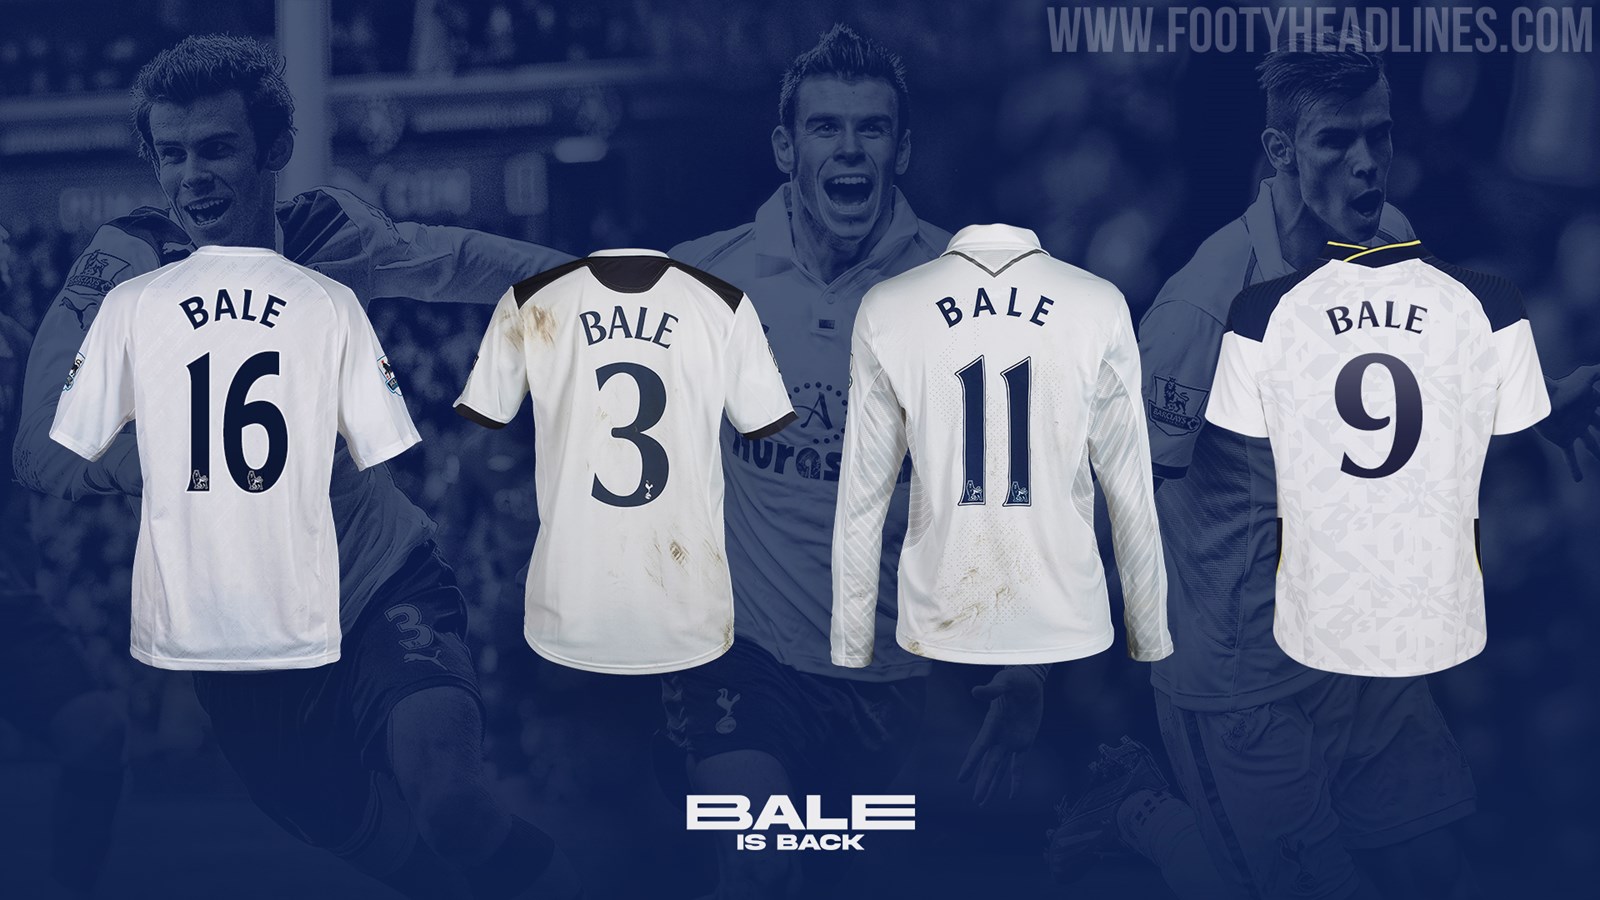 Bale Becomes Tottenham's No. 9 - 'Wrong' Number On Social Media, Fourth  Different Number For Spurs - Footy Headlines